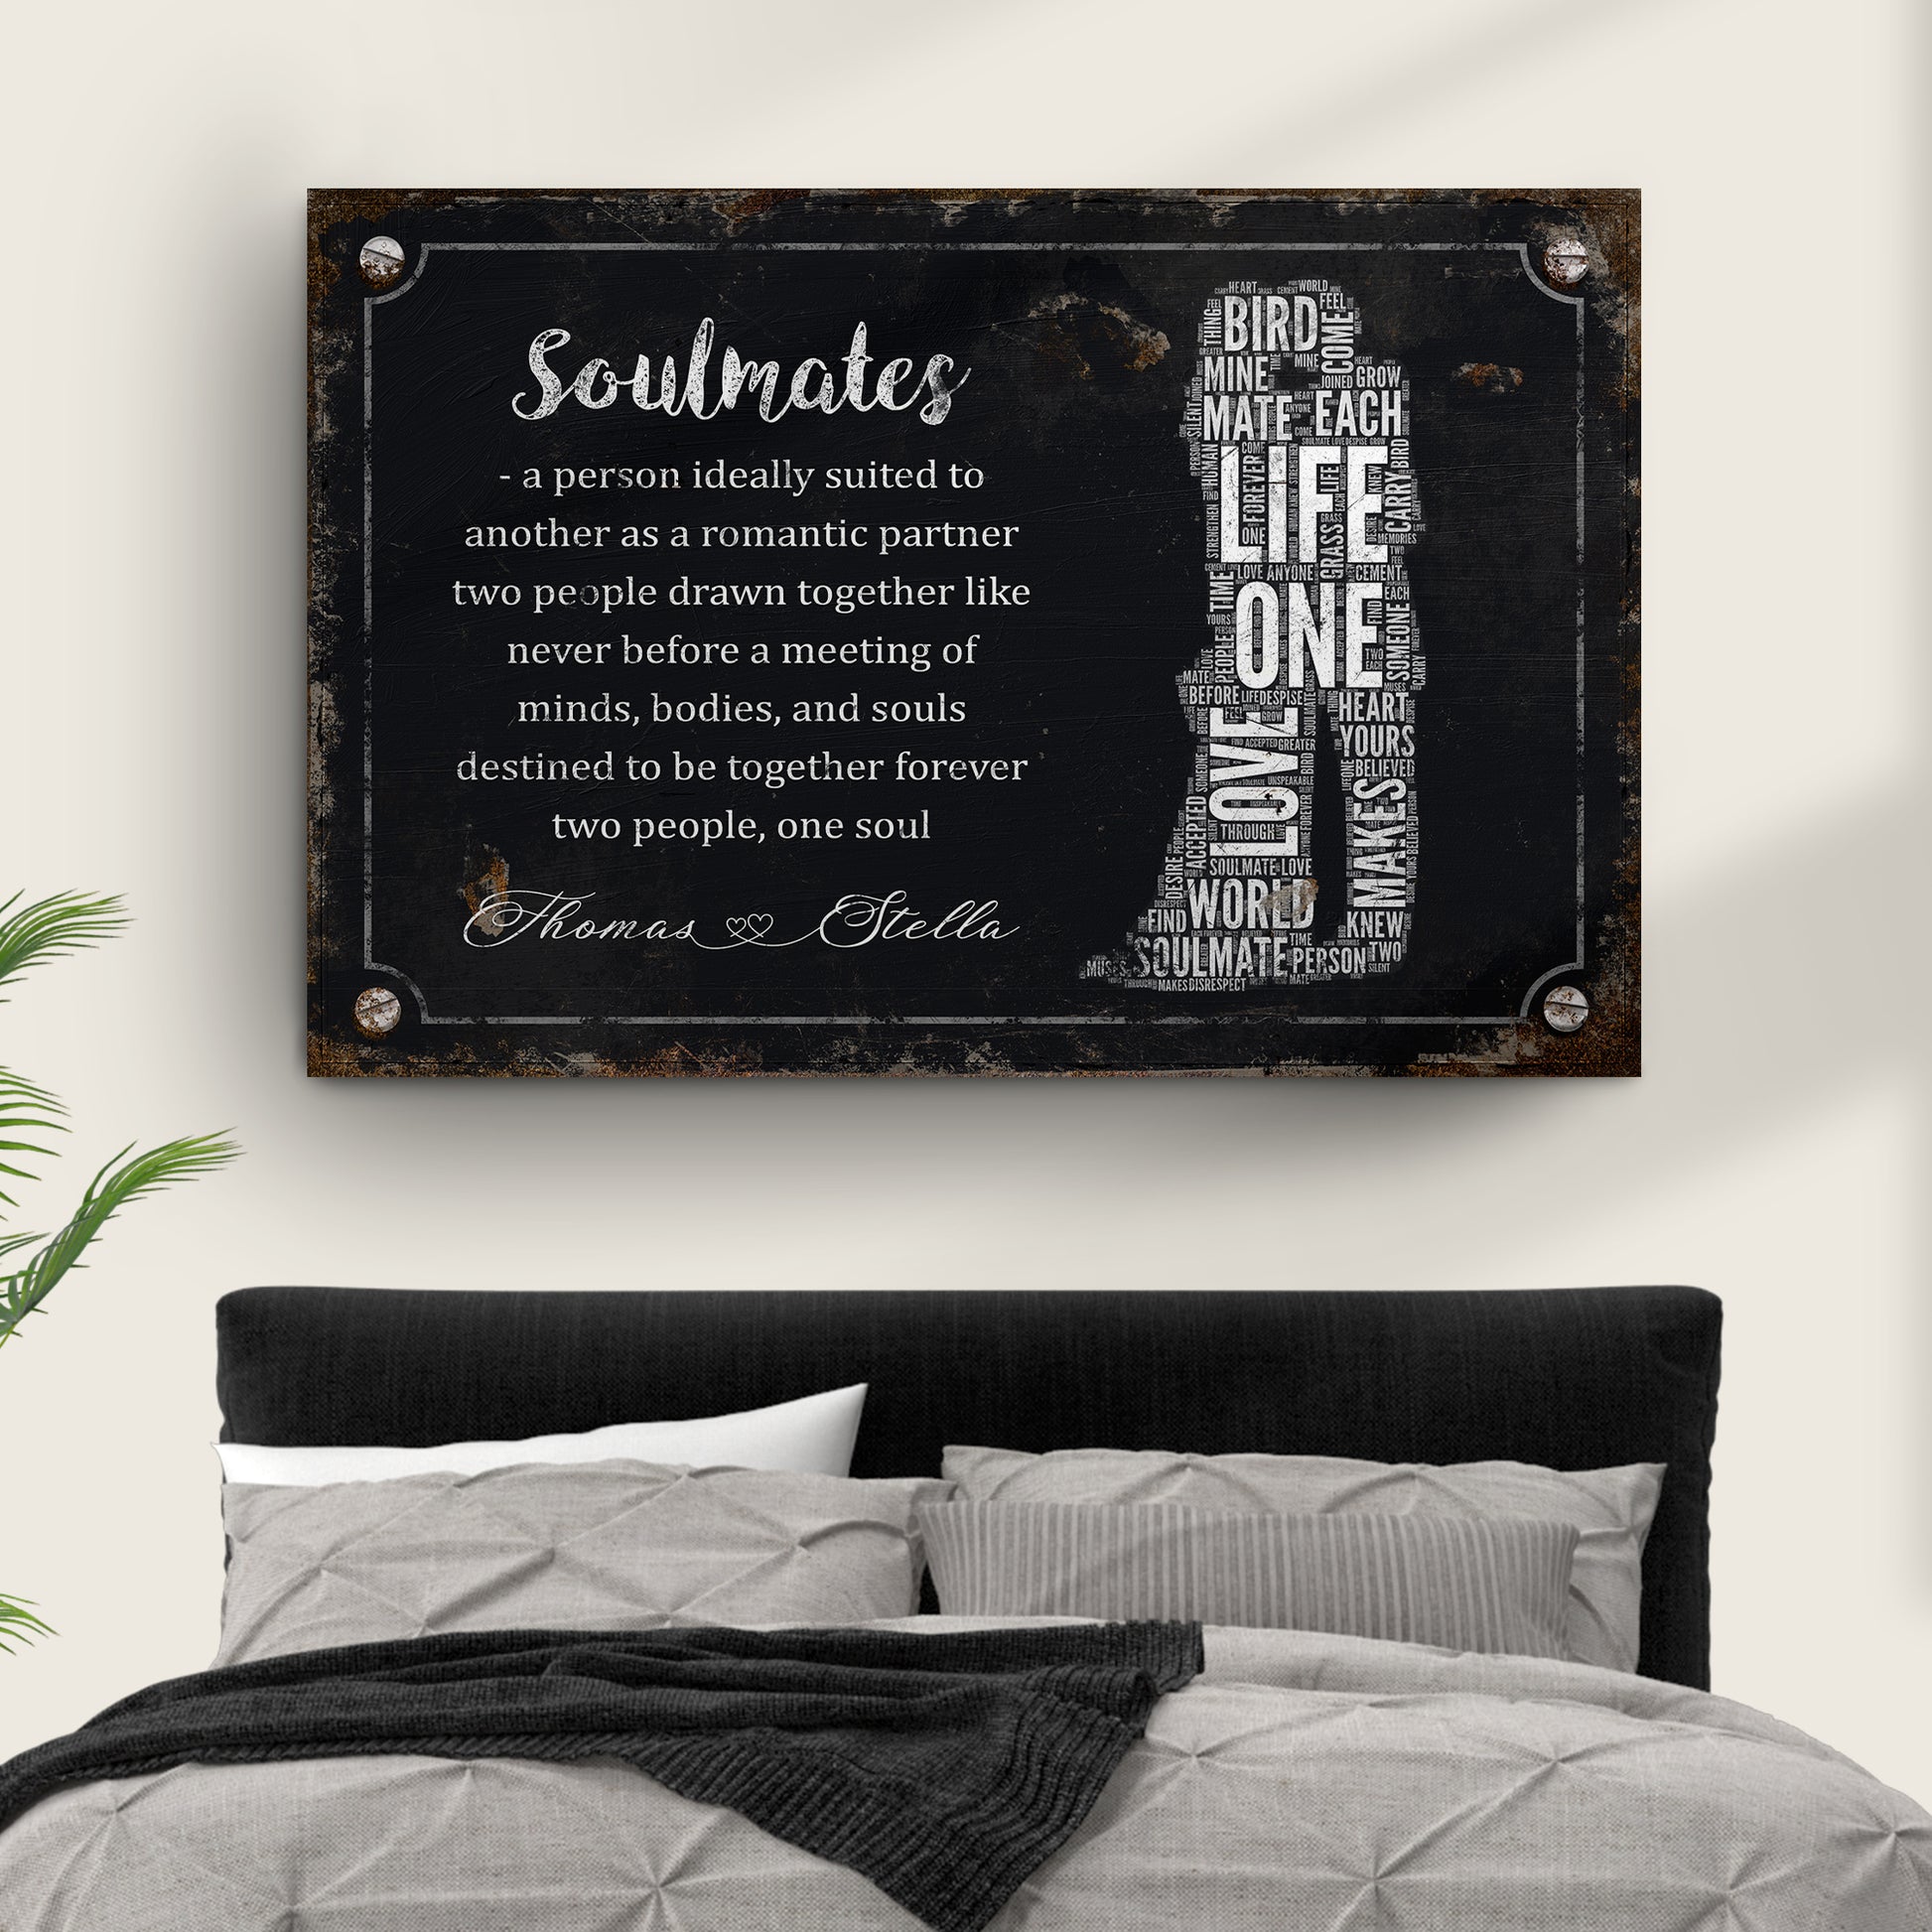 Soulmates Couple Sign  - Image by Tailored Canvases